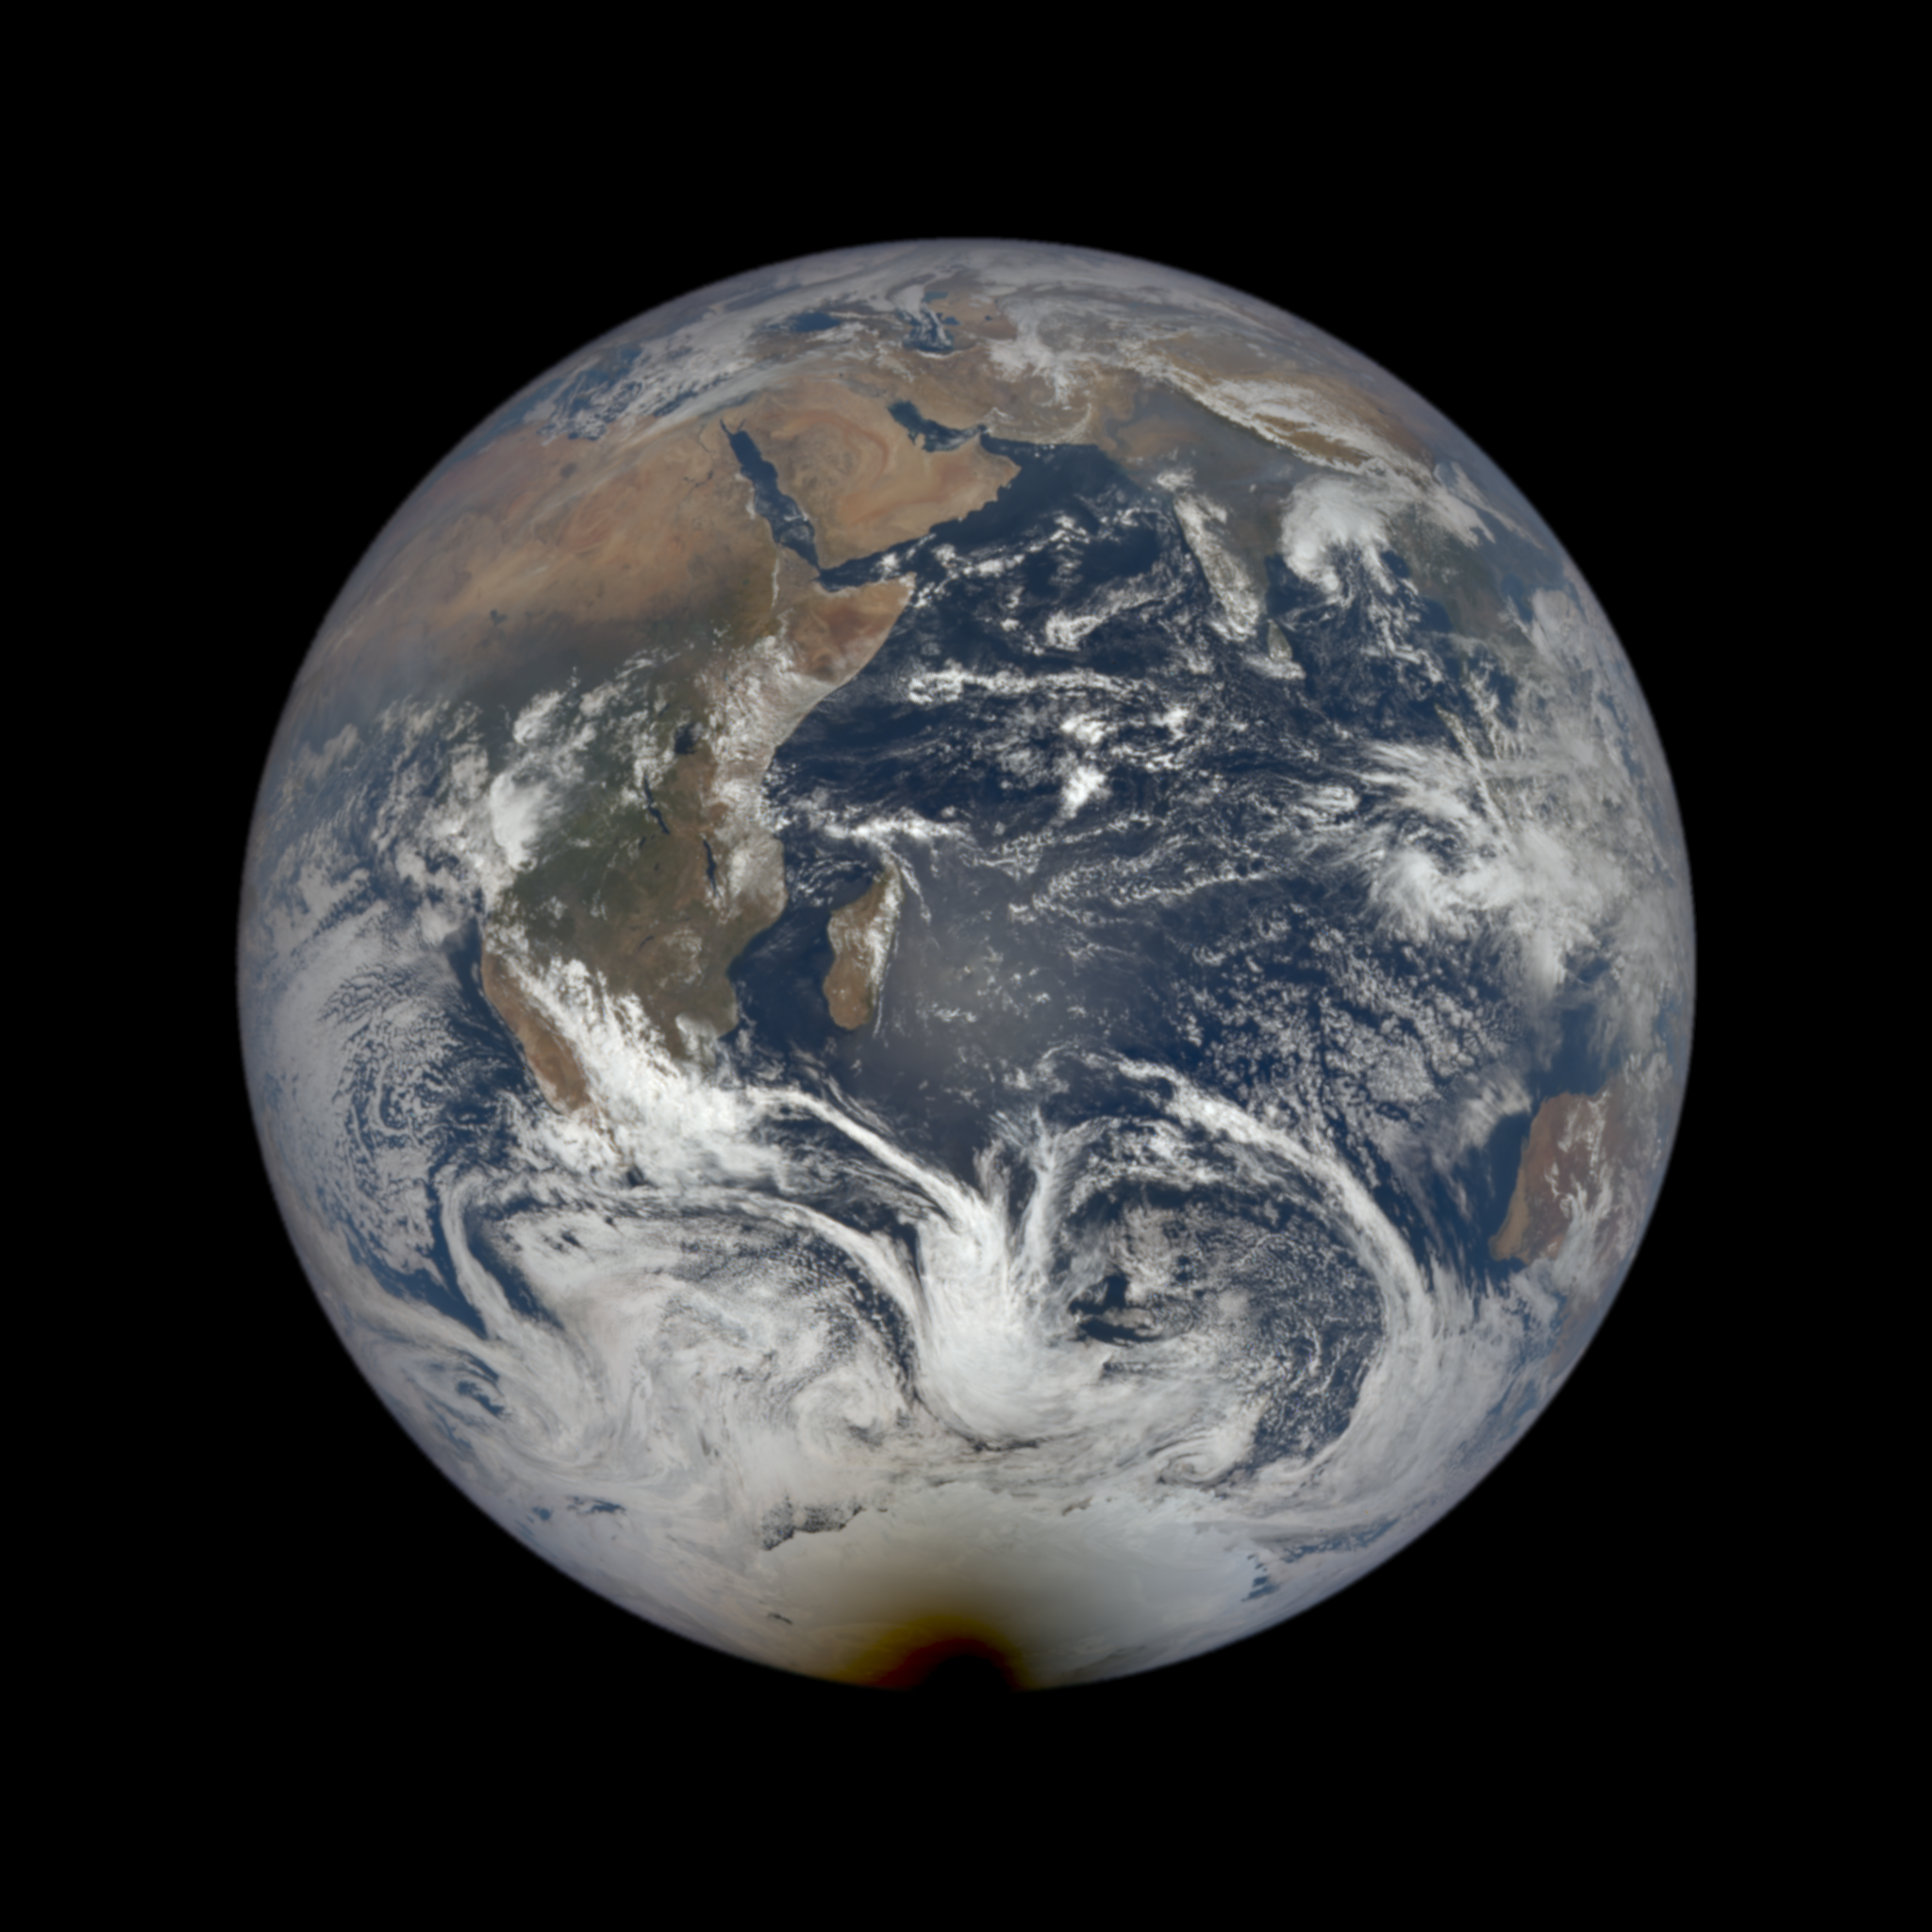 The Moon’s shadow on the Earth taken by the camera on board the Deep Space Climate Observatory (DSCOVR). Image courtesy of NASA